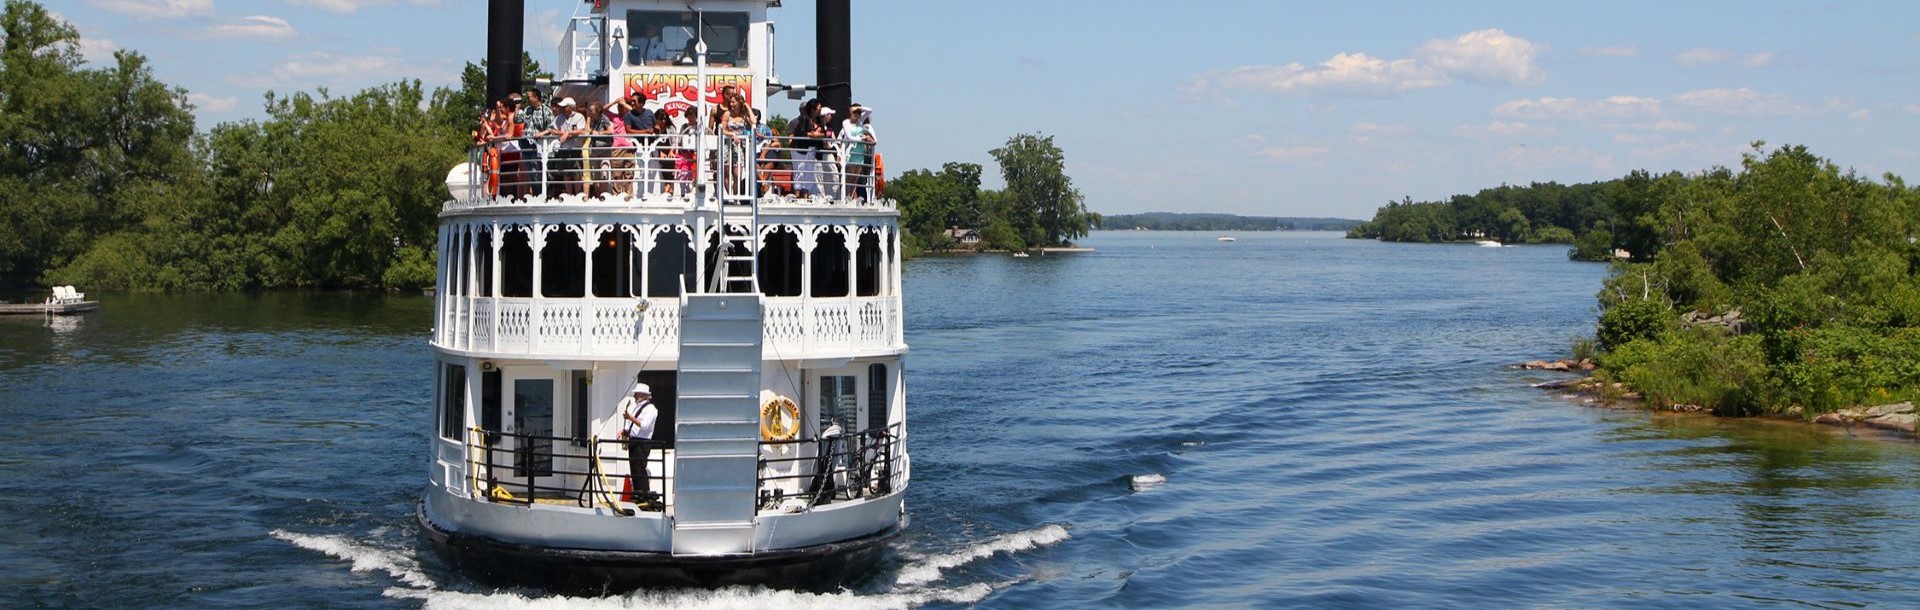 Heart of the 1000 islands Cruise 